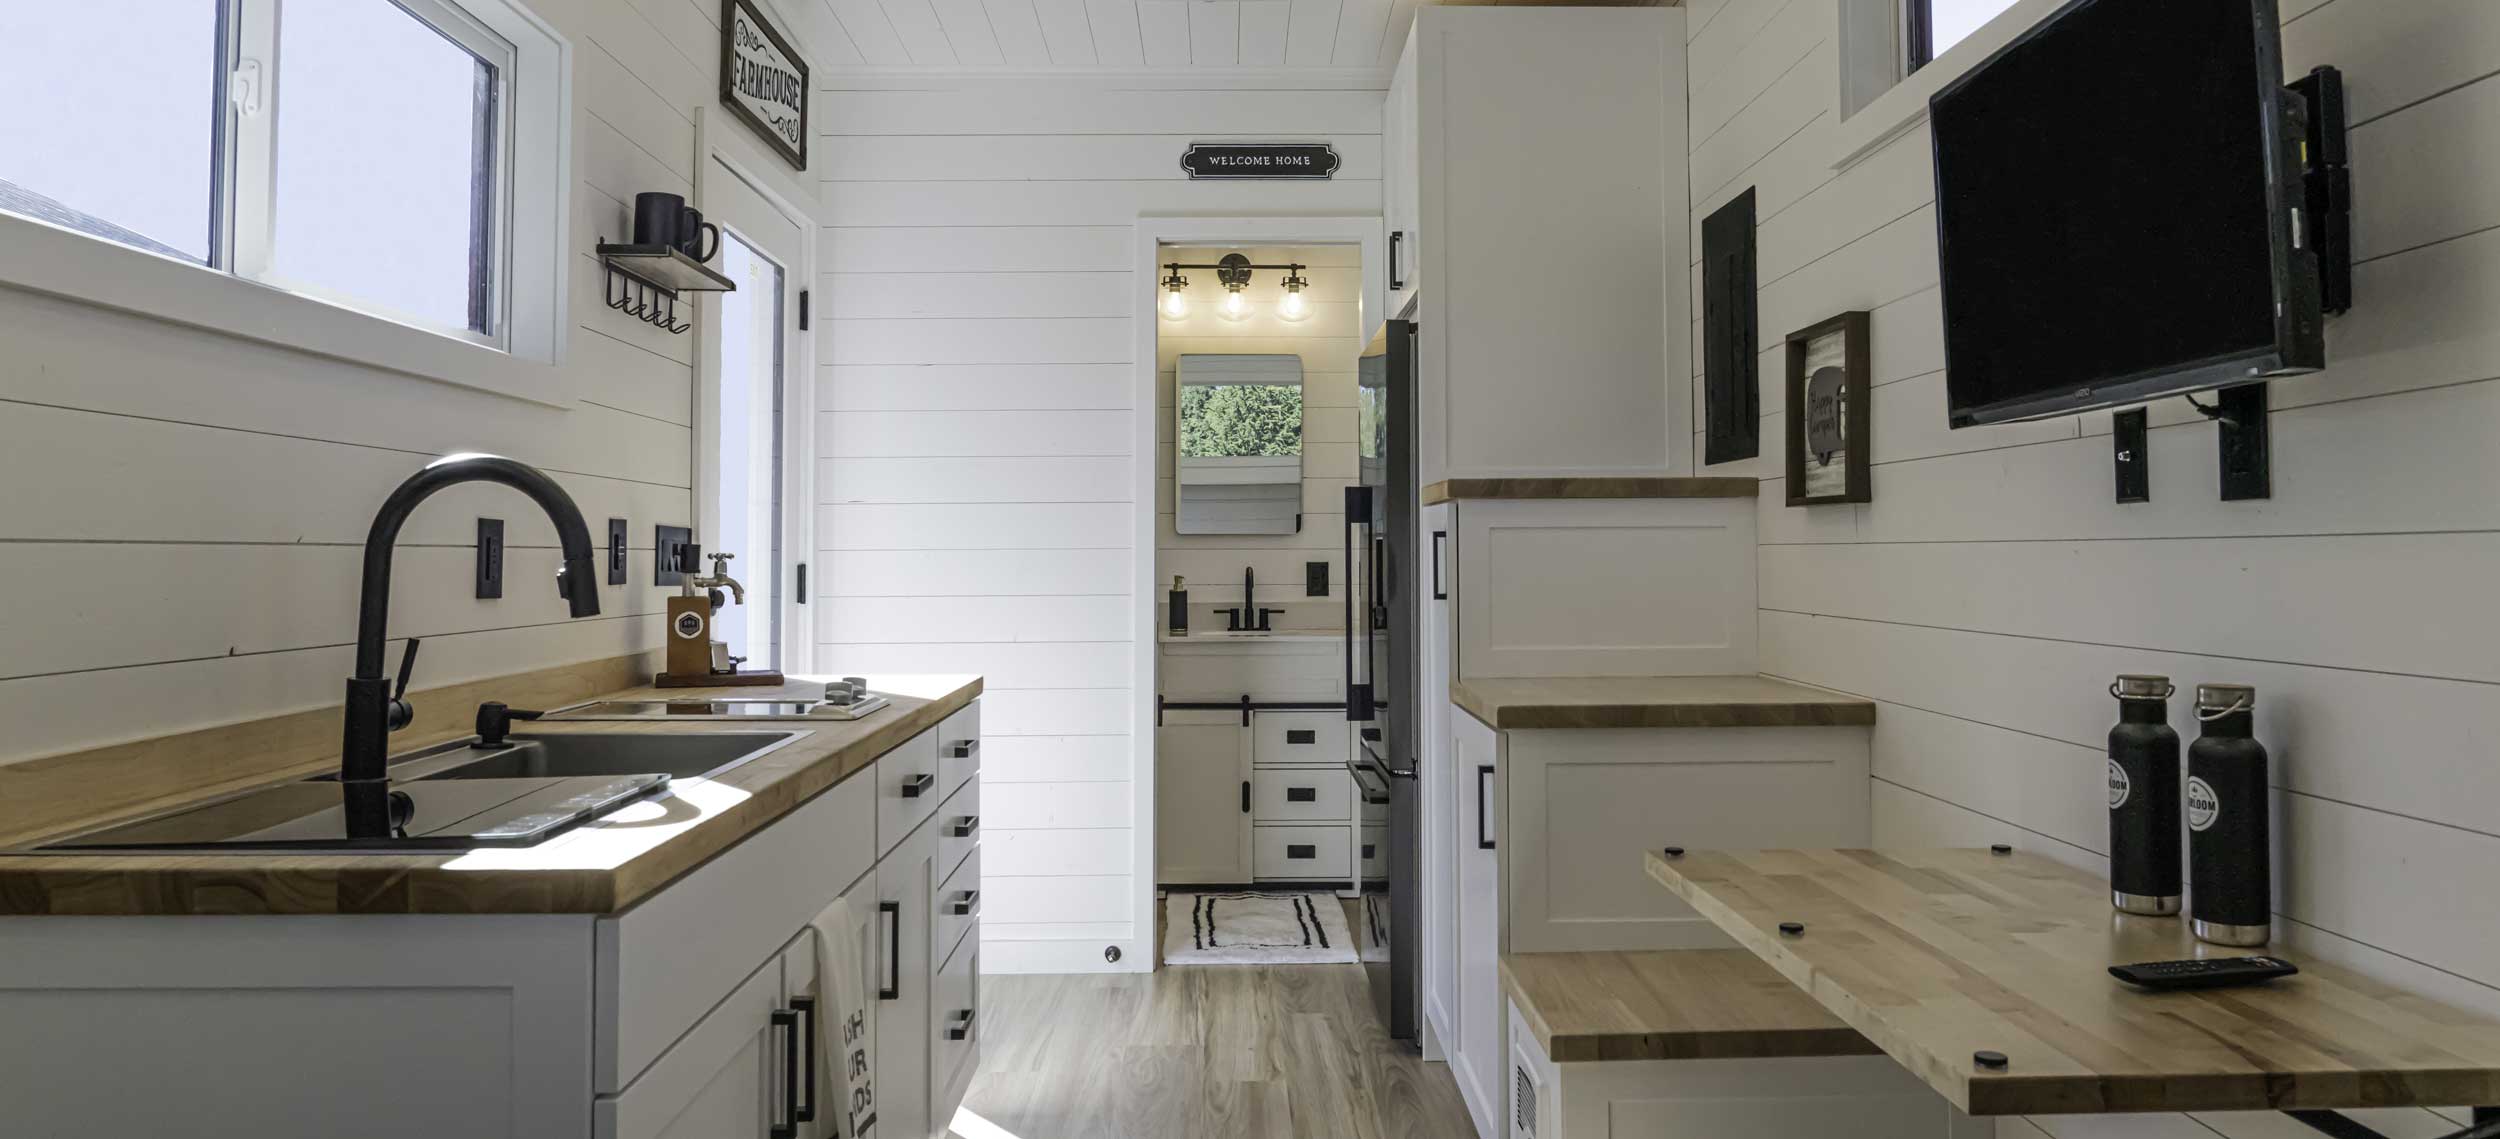 Interior of a tiny house for sale from Tiny Heirloom